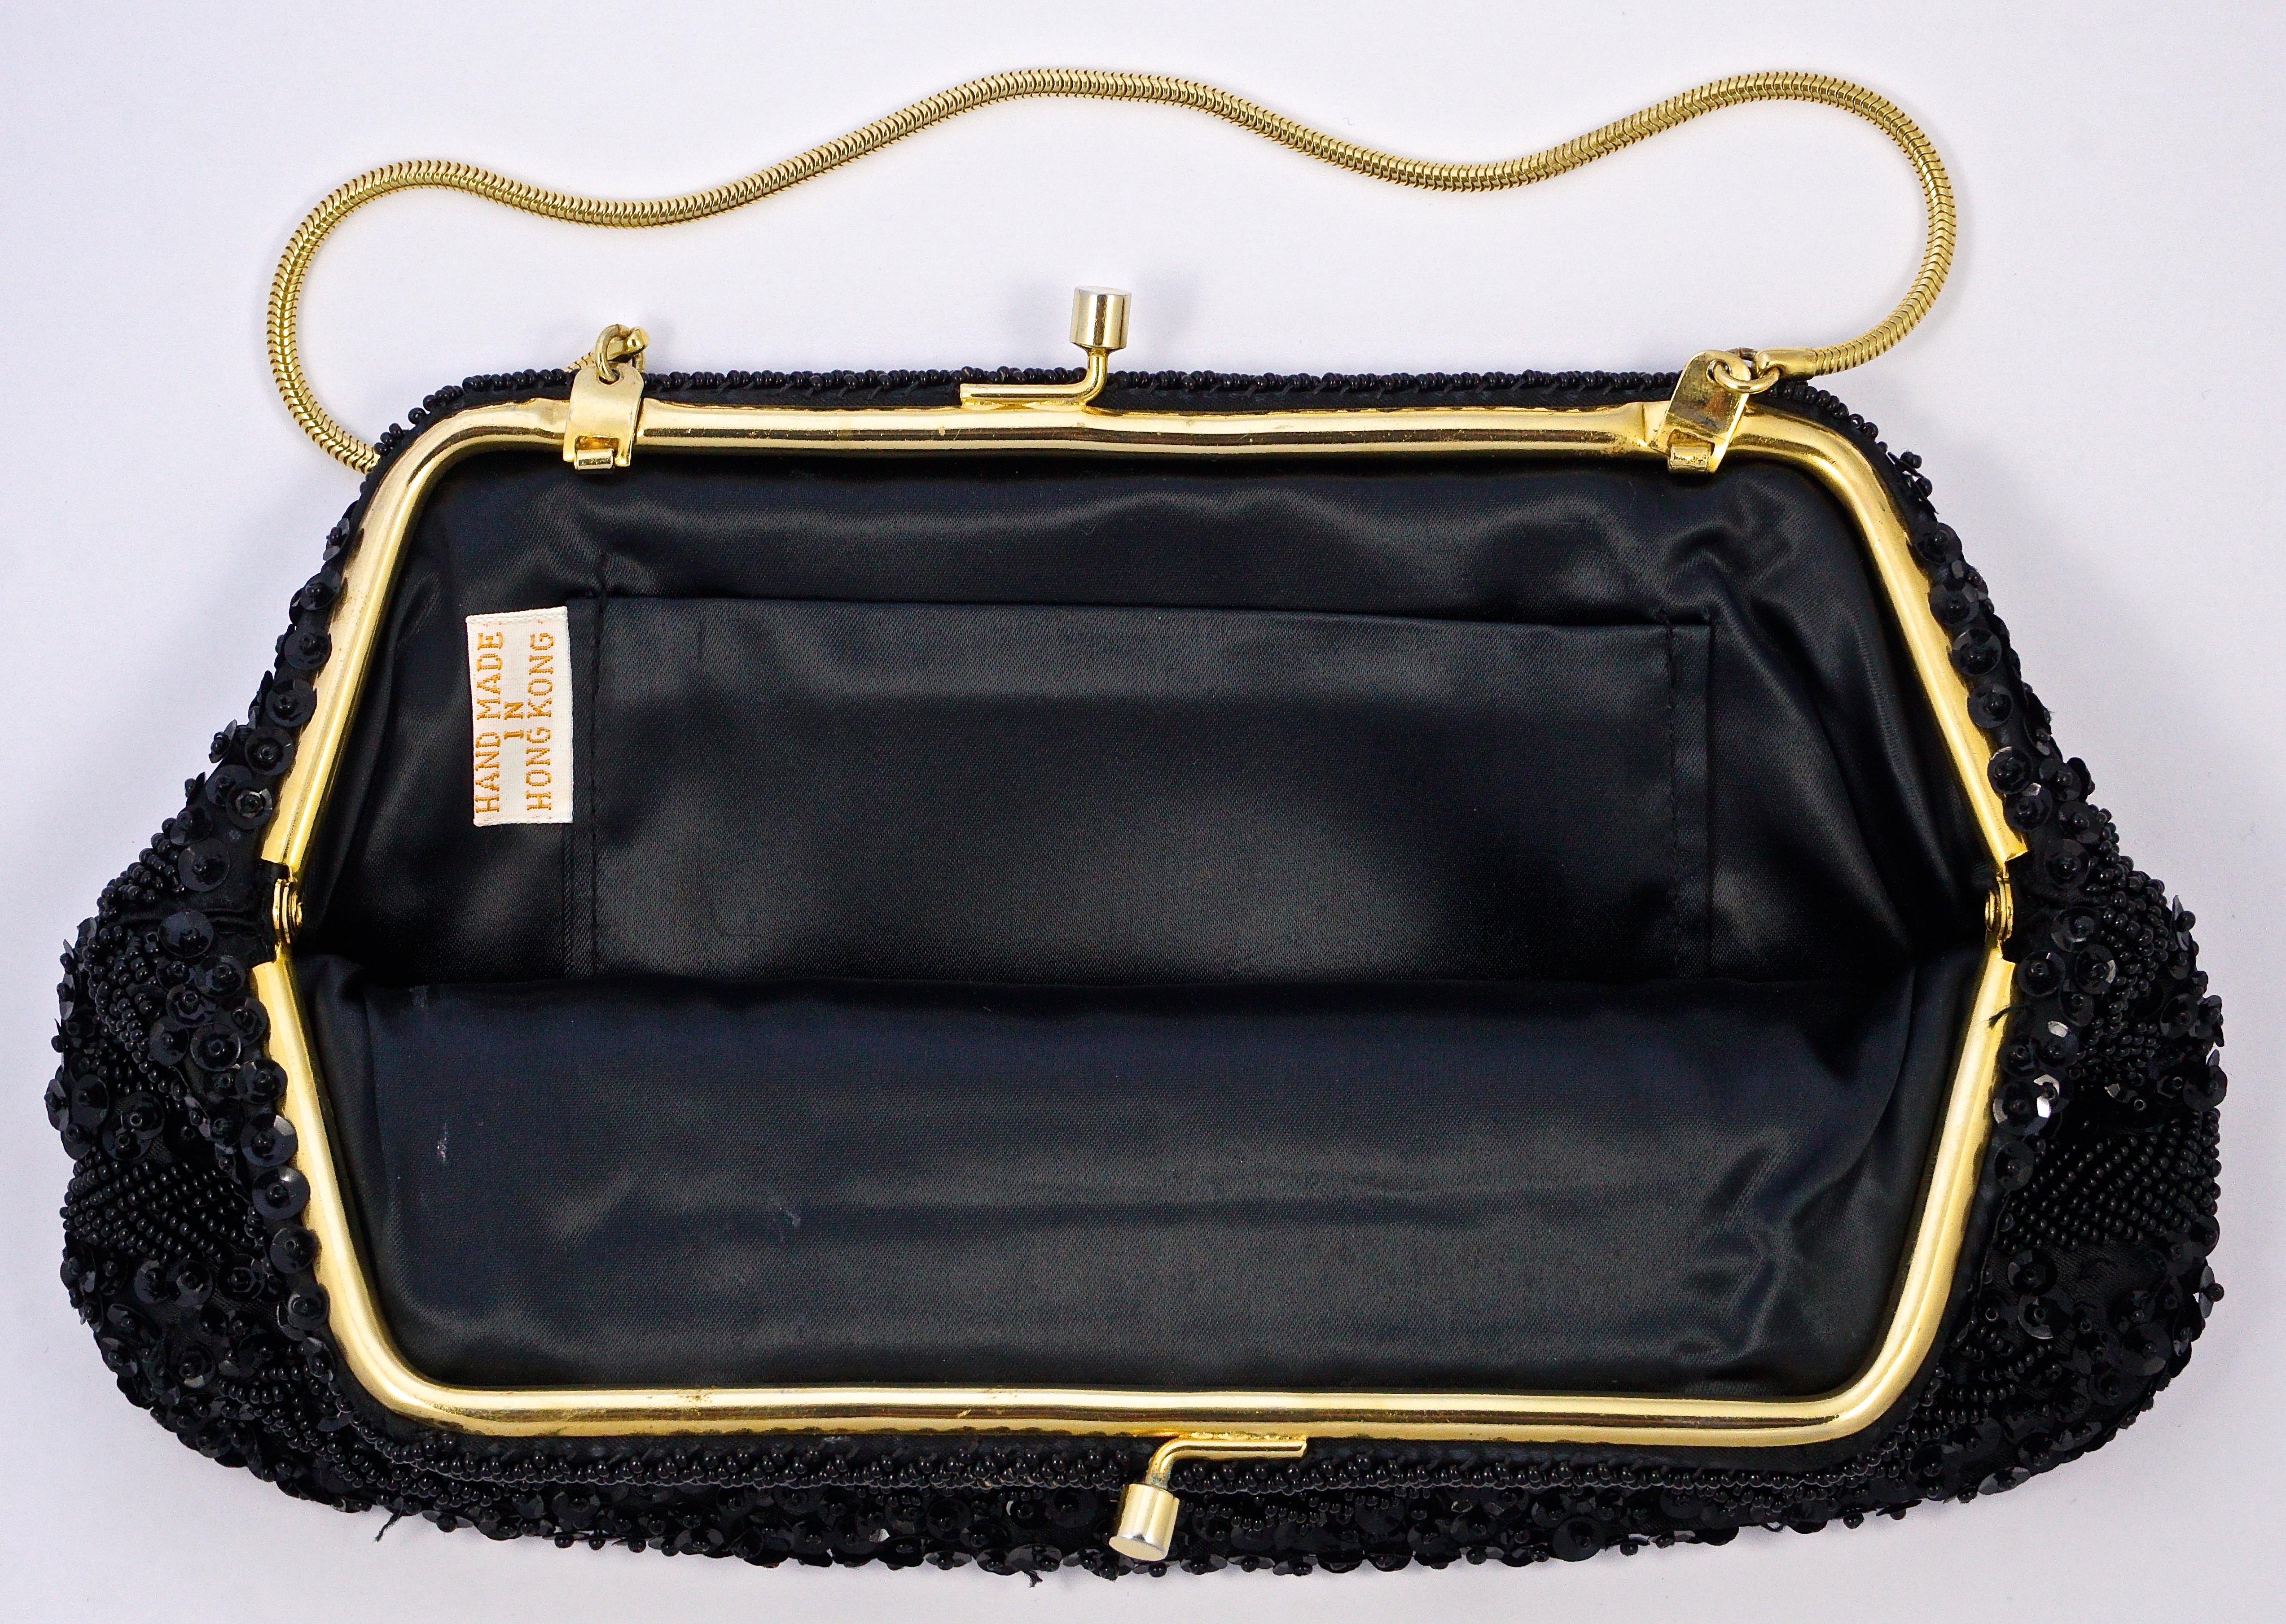 With  Bonus Black /& Gold Beaded Mirrored Lipstick Case Made in Hong Kong Vintage Hand Beaded Black Clutch Purse